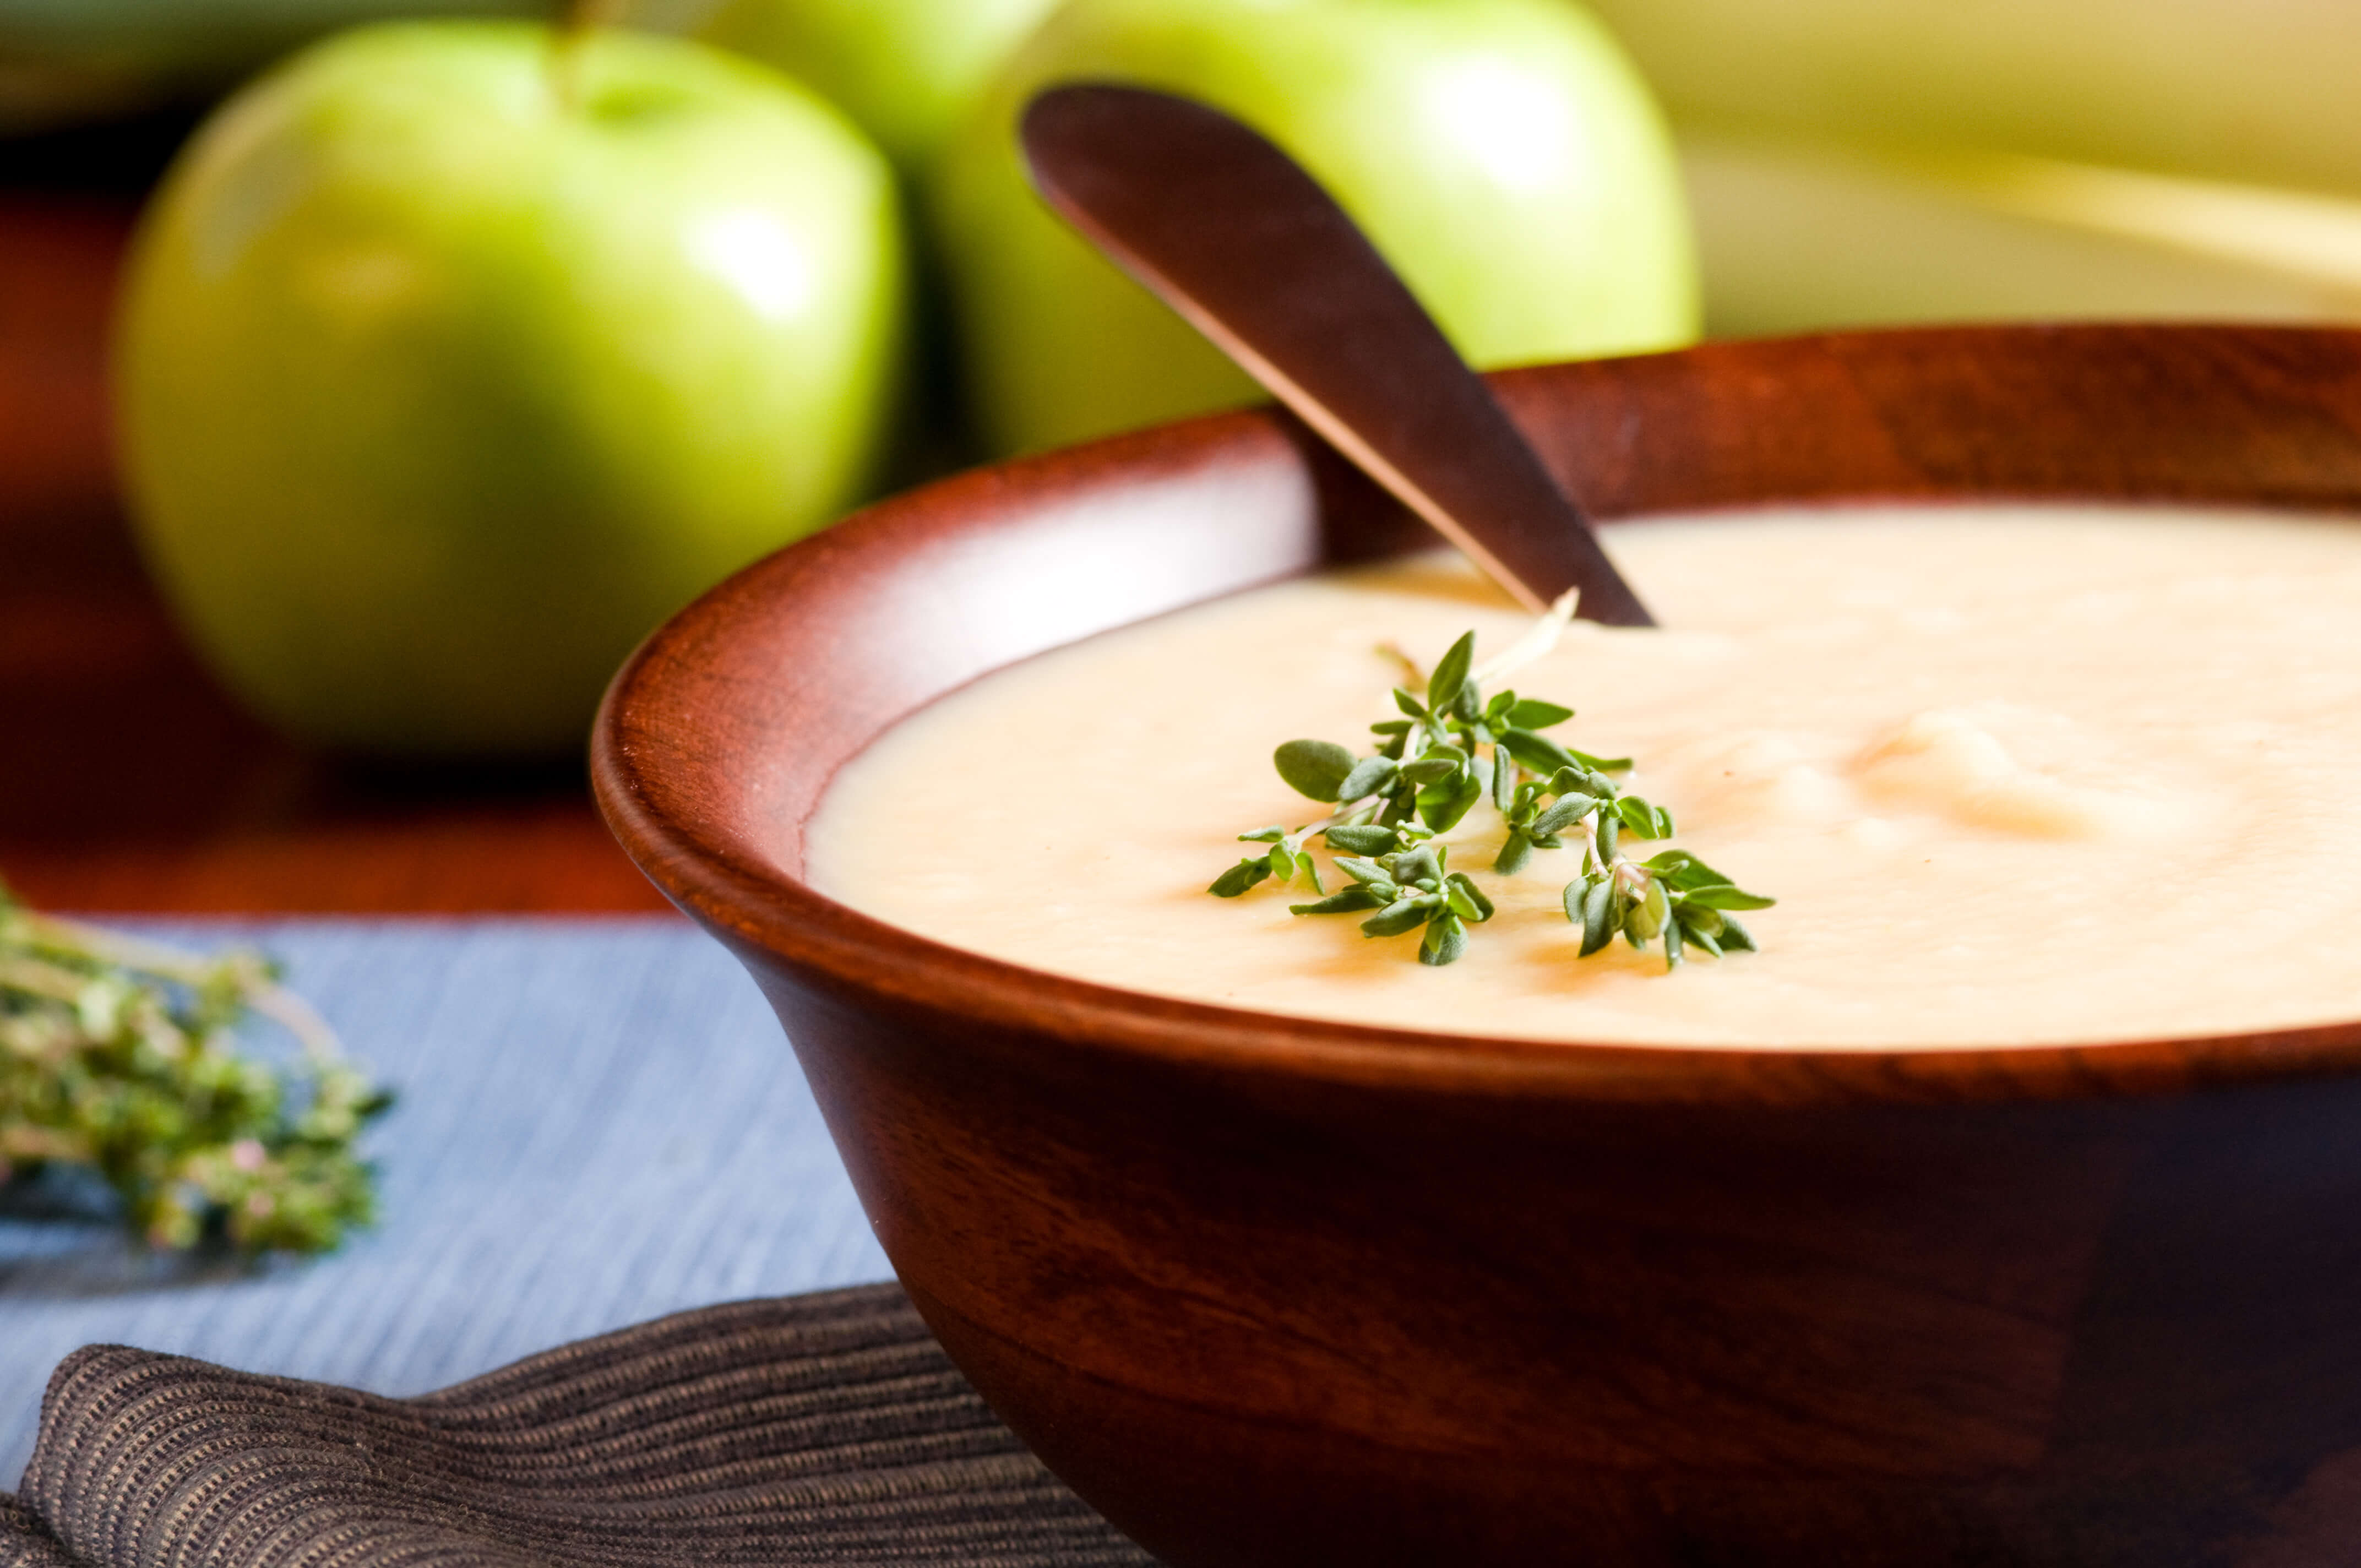 Apple and Roasted Parsnip Soup